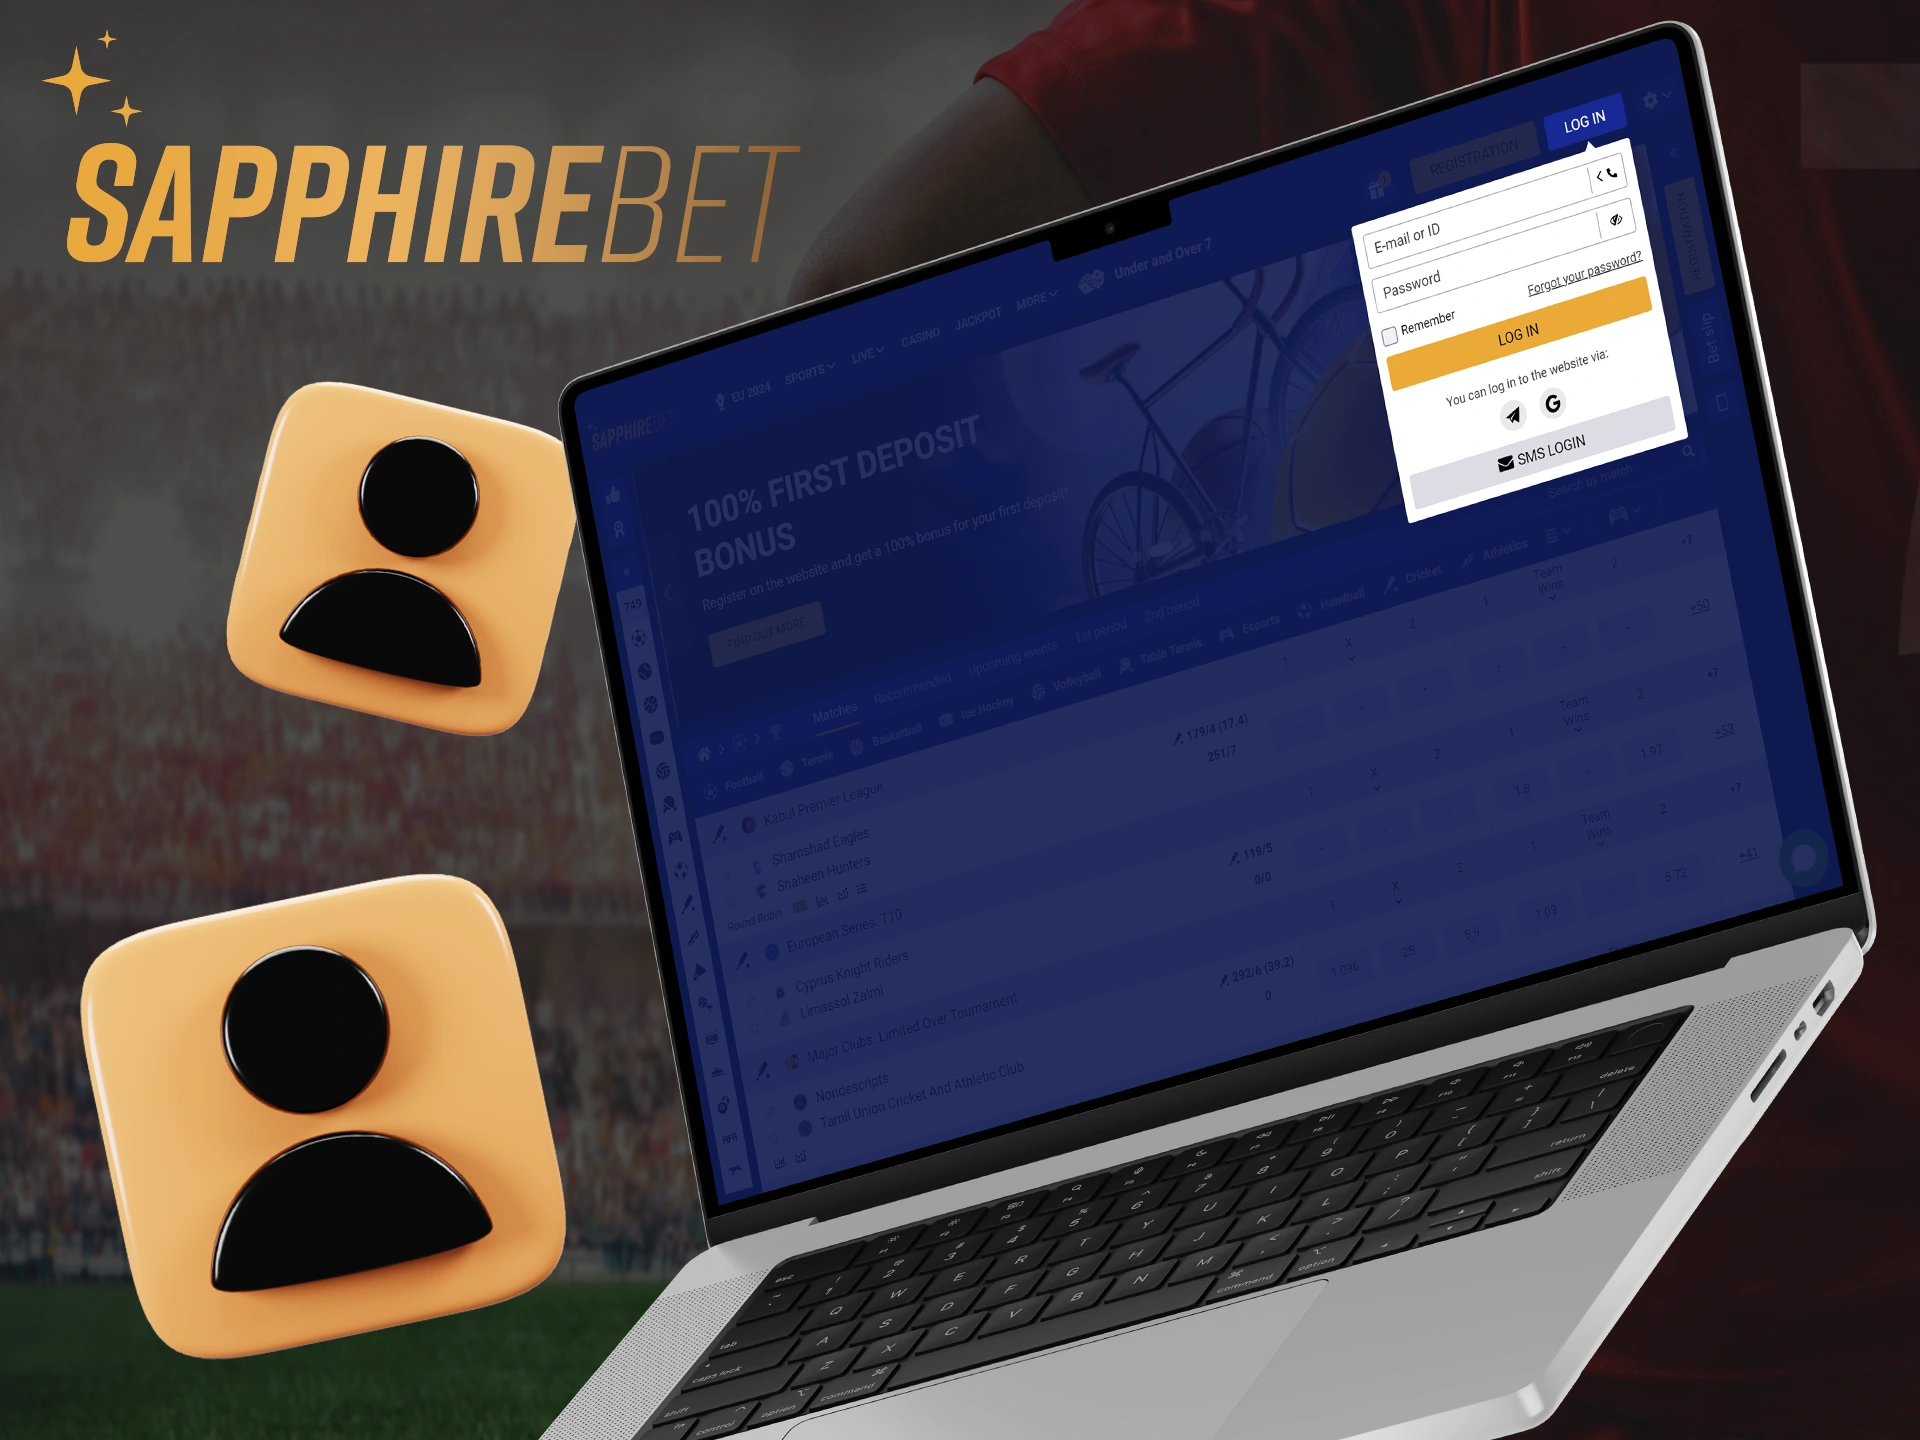 To bet on football, log in to your SapphireBet profile.